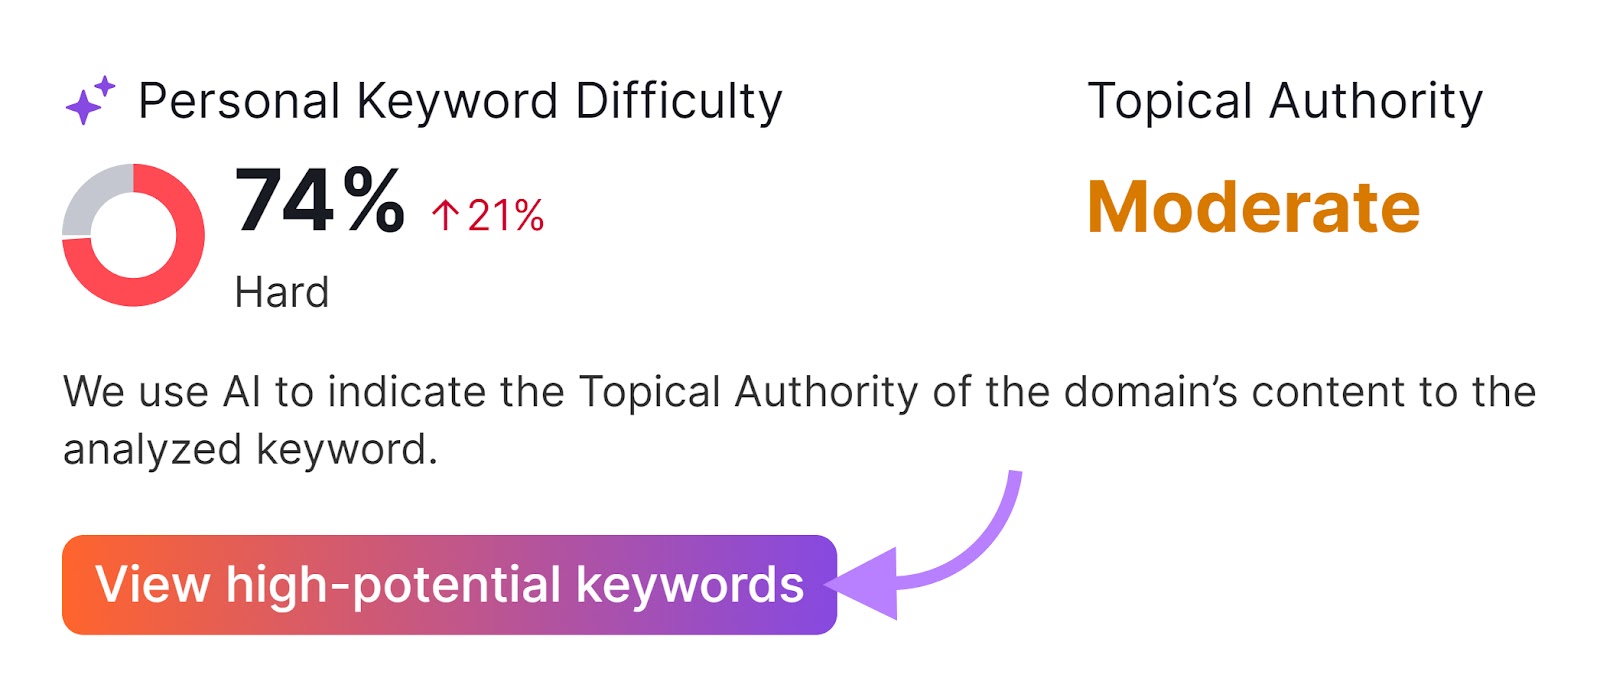 Keyword Overview tool "Personal Keyword Difficulty" section with the "View high-potential keywords" button highlighted.